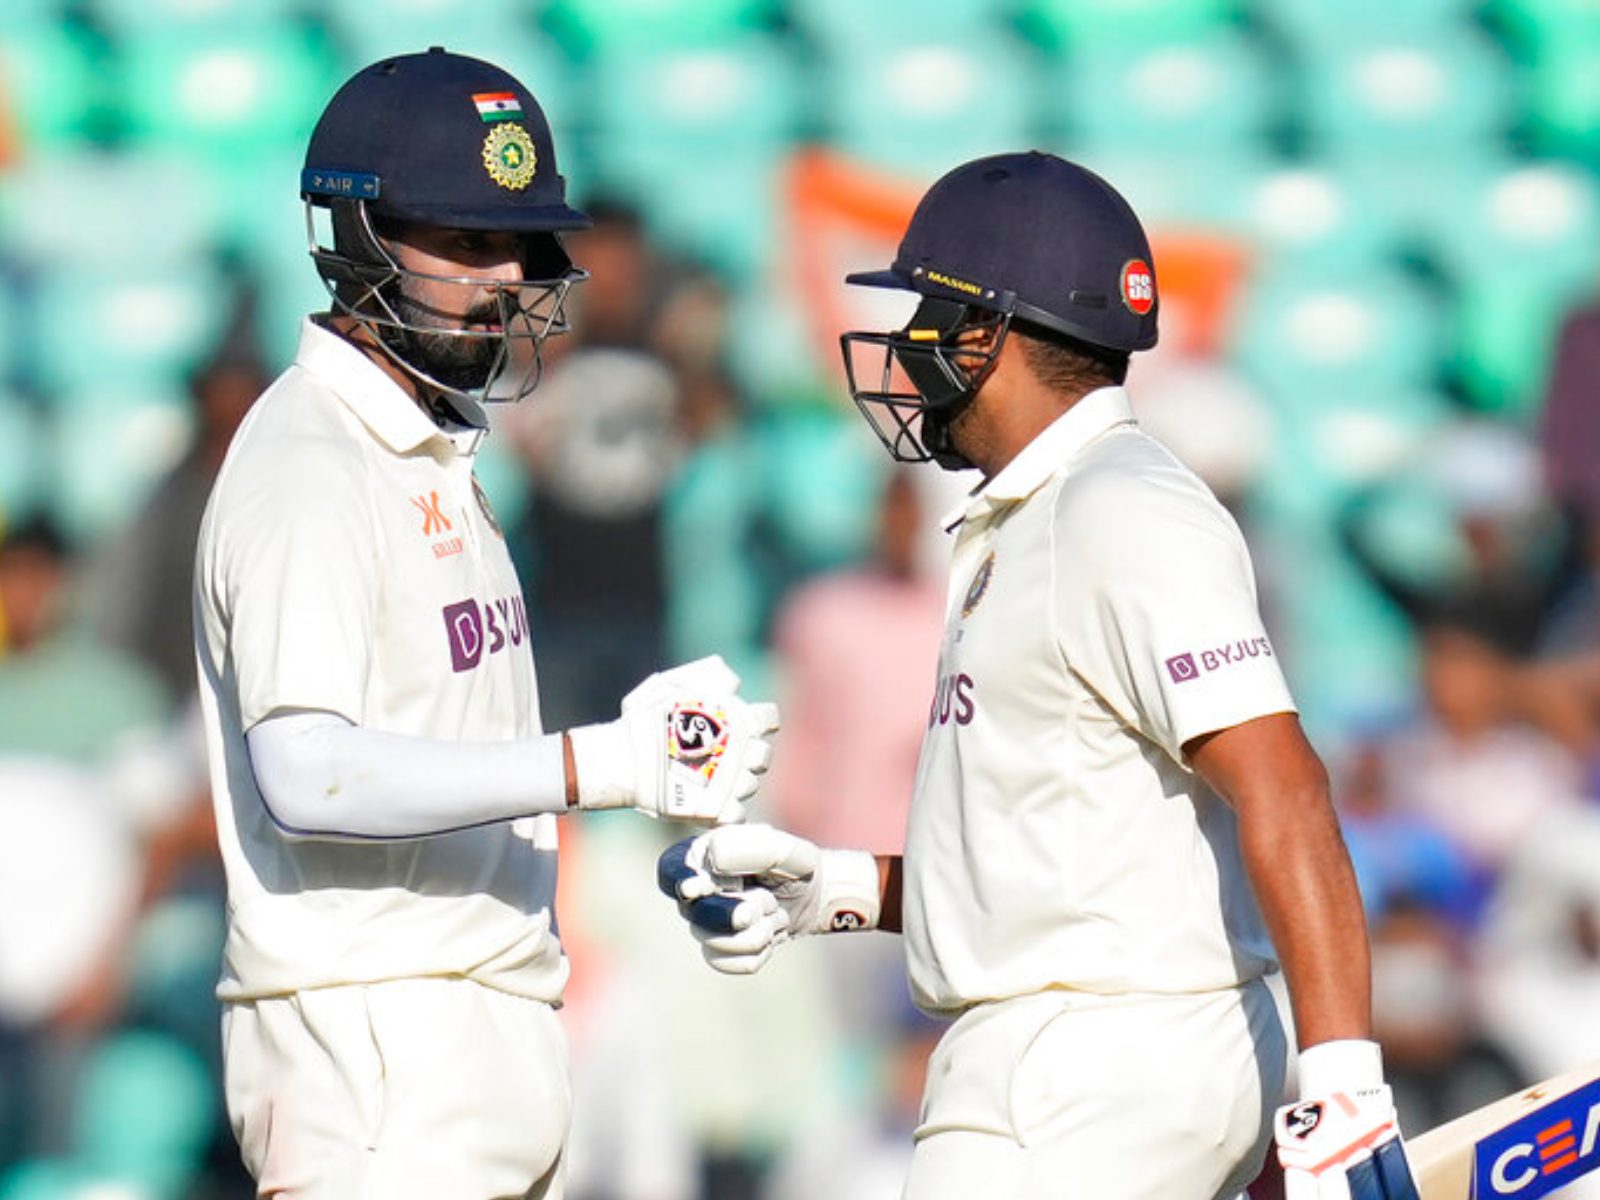 2nd Test IND vs AUS Highlights India 21/0 at Stumps on Day 1, Trail Australia by 242 Runs